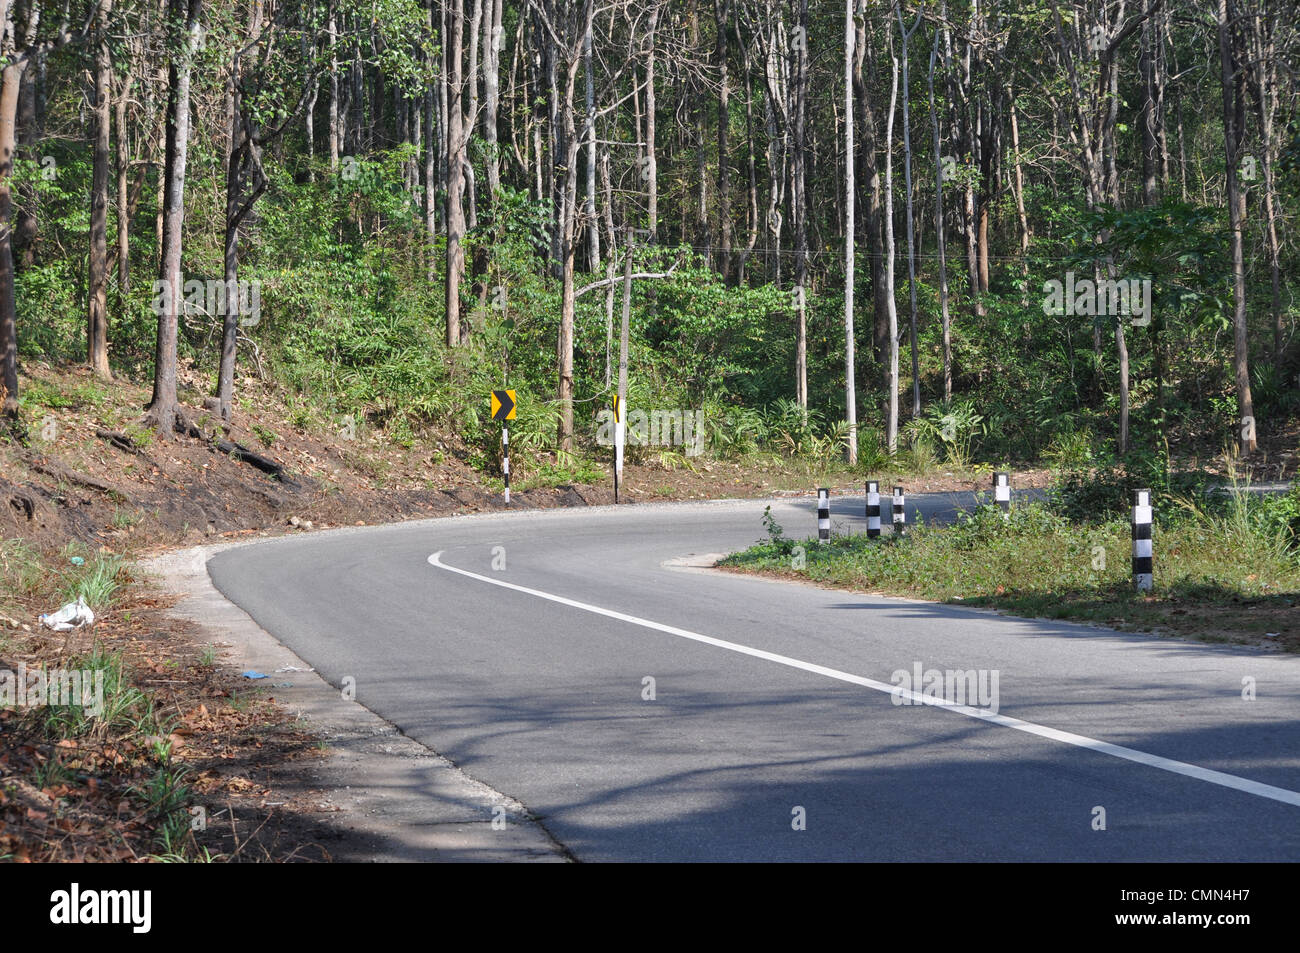 A beautiful country road with a sharp curve indicated by a road sign board along side a teak wood plantation Stock Photo